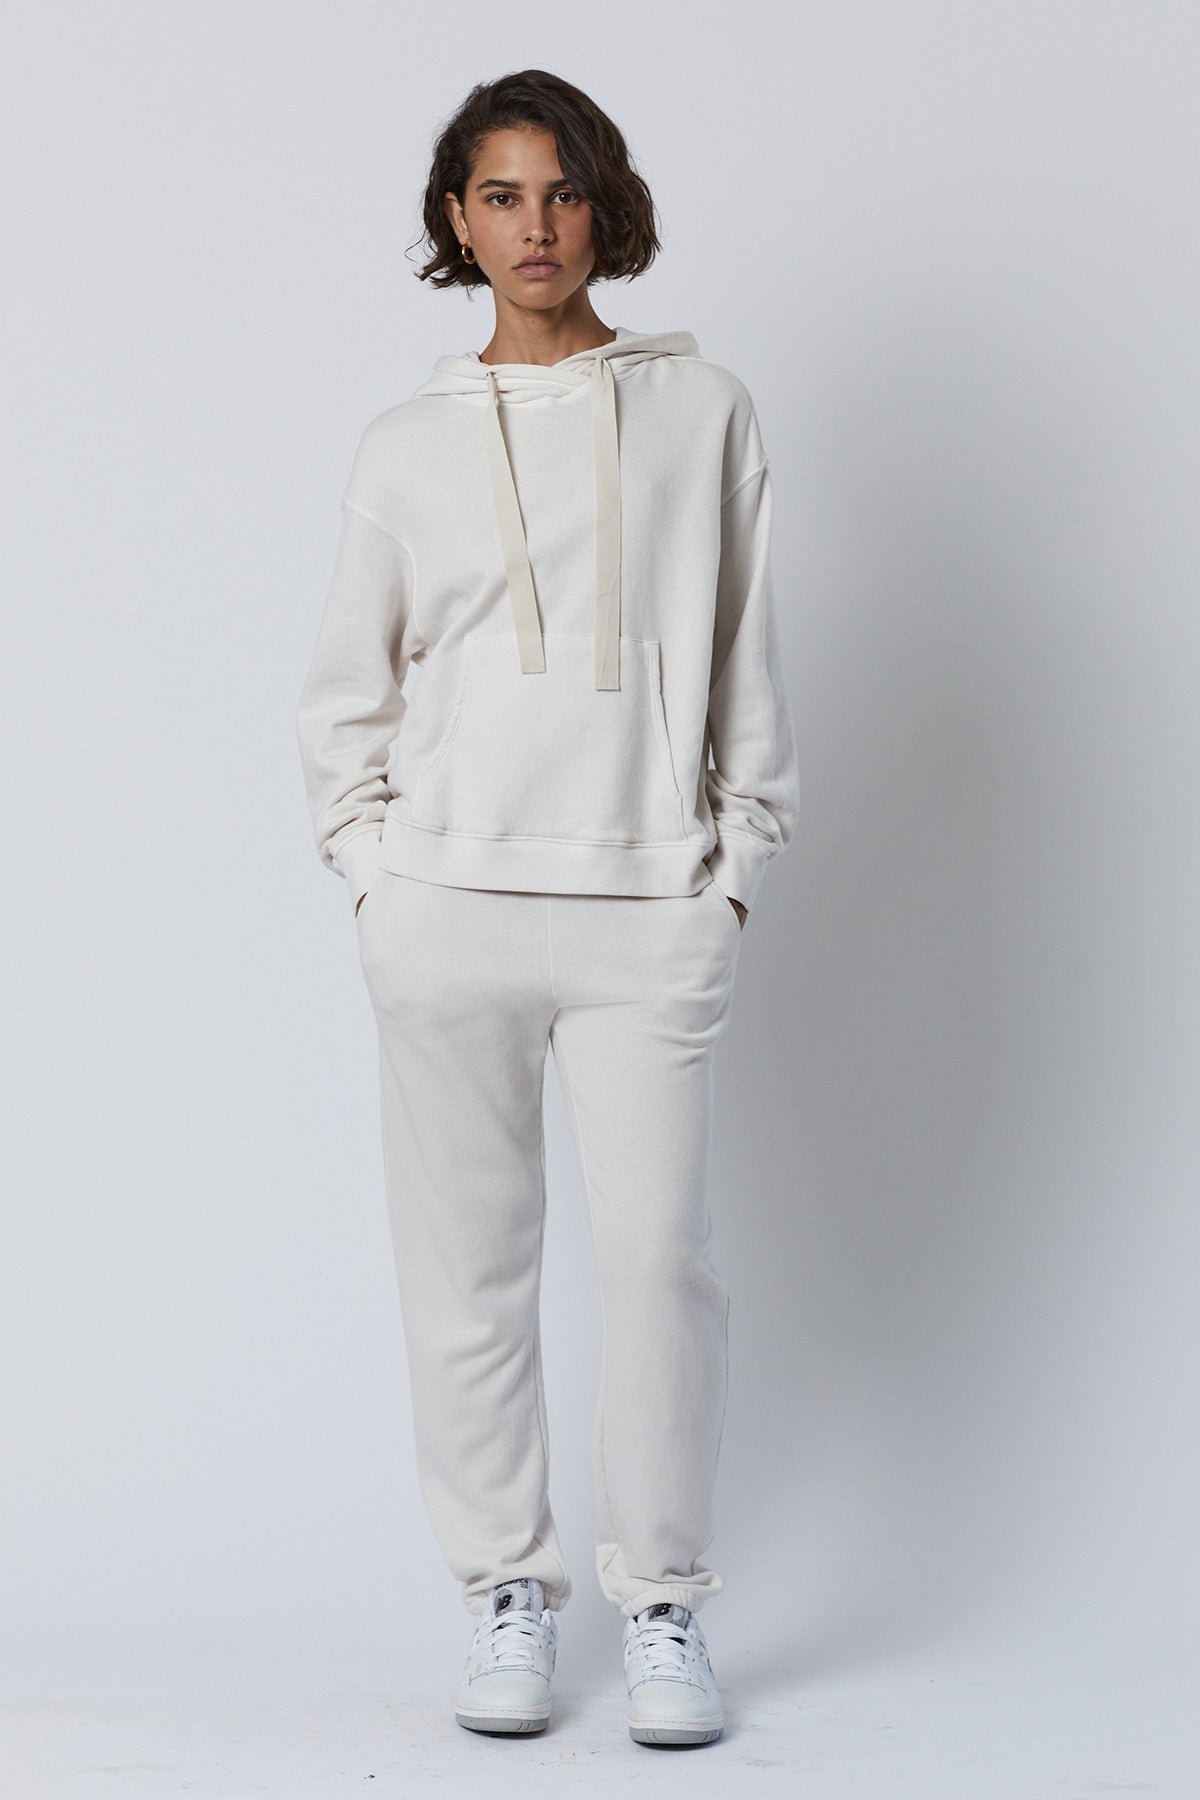   Ojai Hoodie in beach with Zuma Sweatpant full length front 